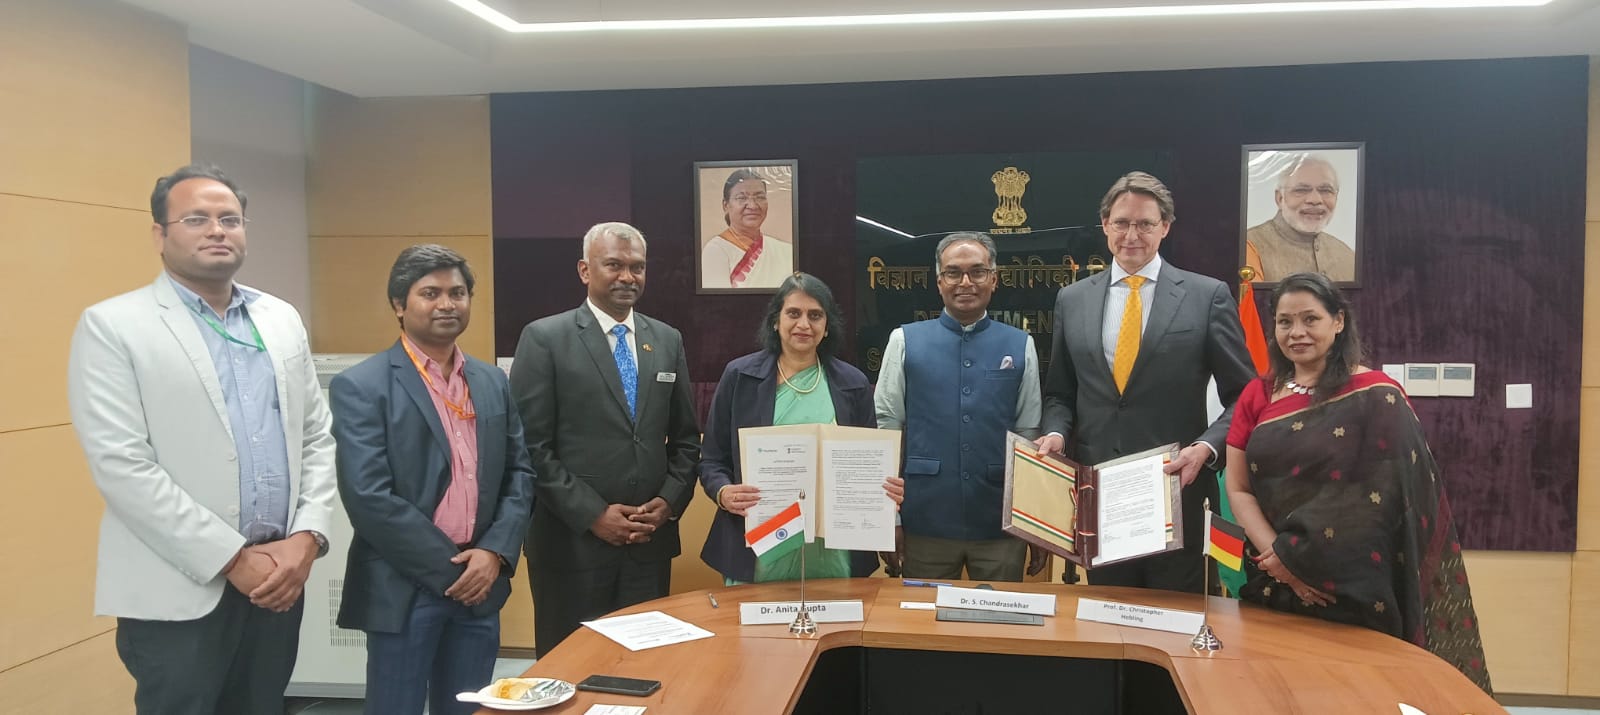 India Partners with Germany's Fraunhofer ISE for Developing Indigenous Hydrogen and Clean Energy Technologies